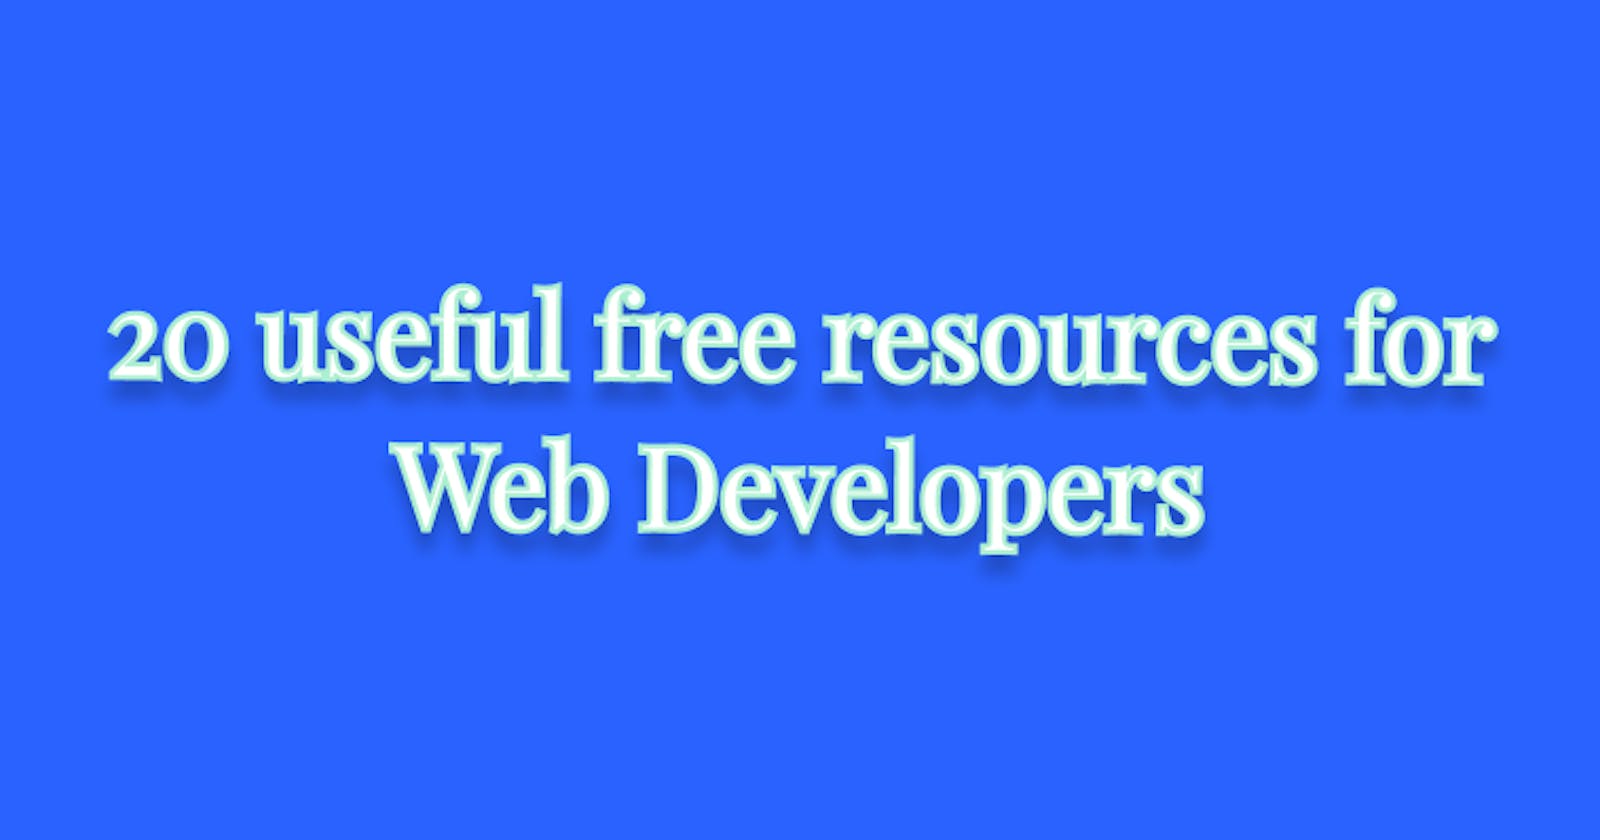 20 useful free resources for Web Developers